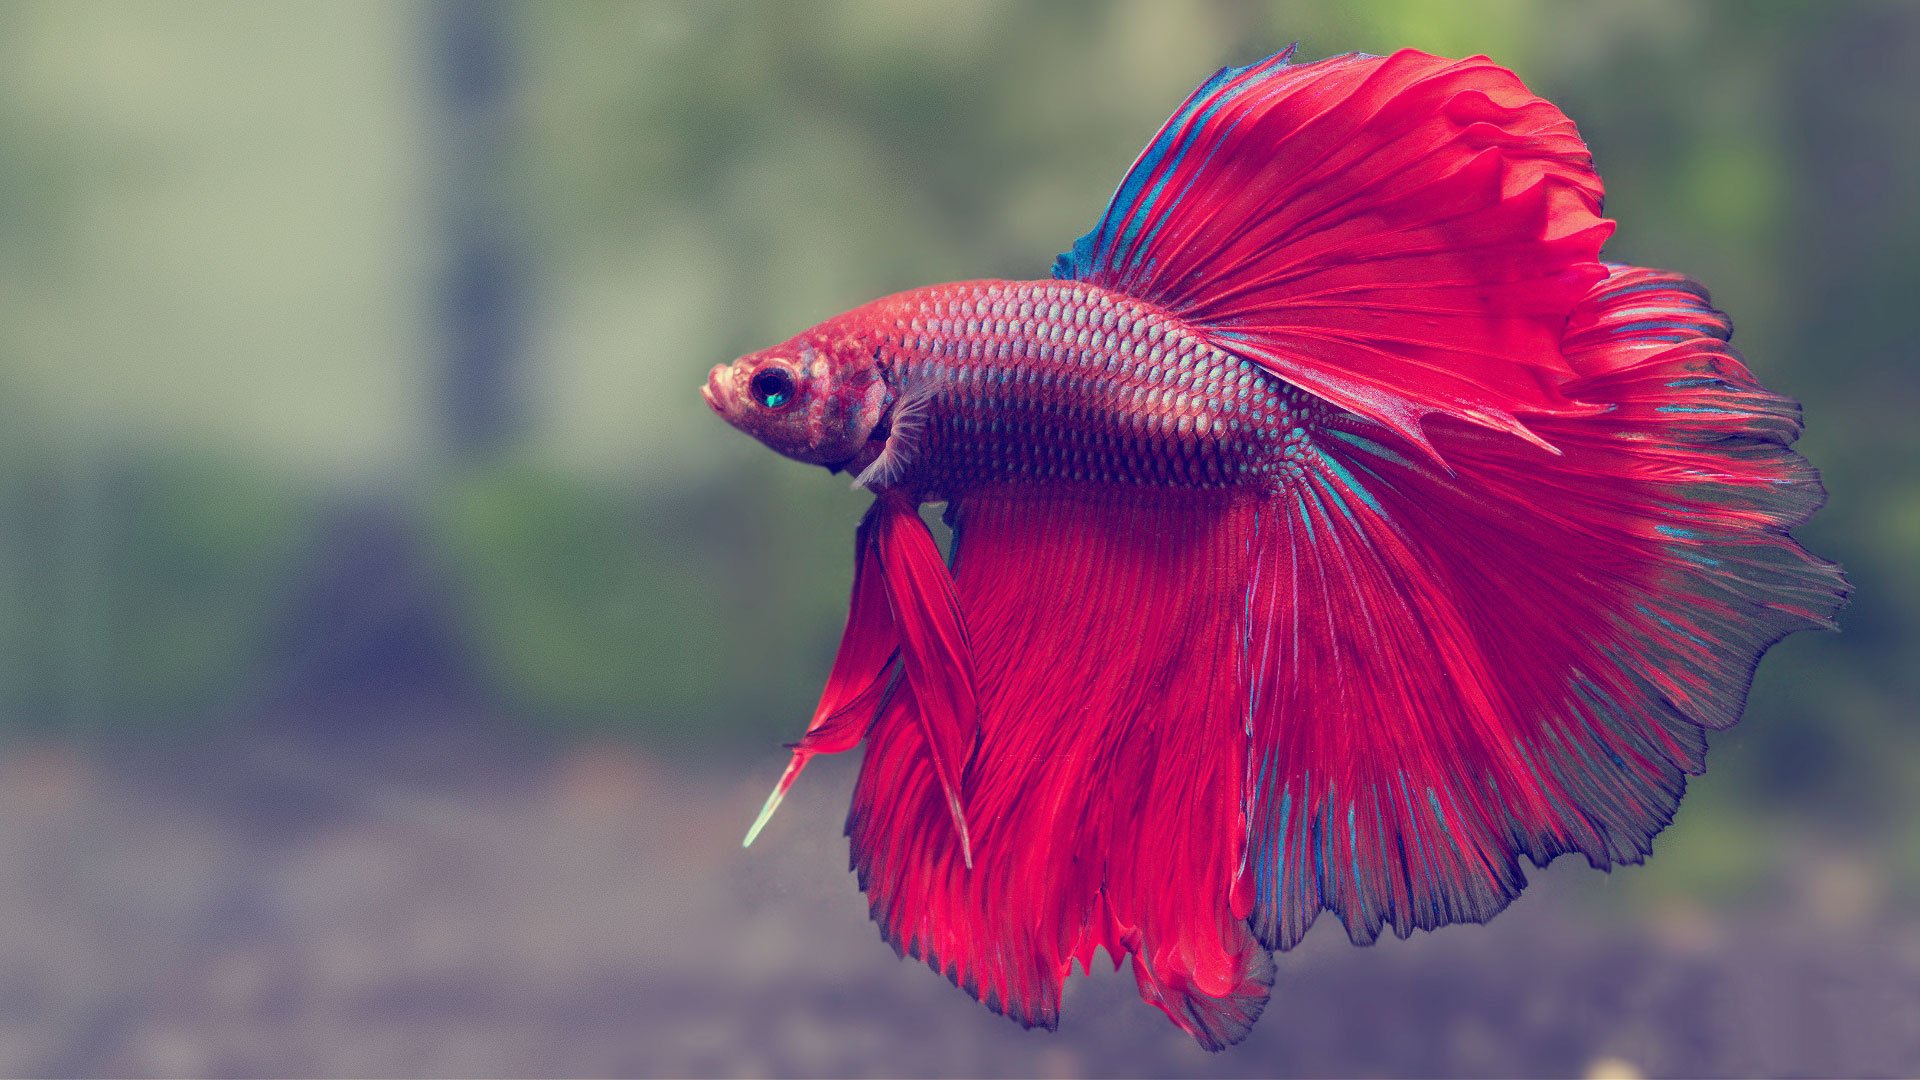 Betta Fish Becoming Popular With Aquarium Enthusiasts in 2023